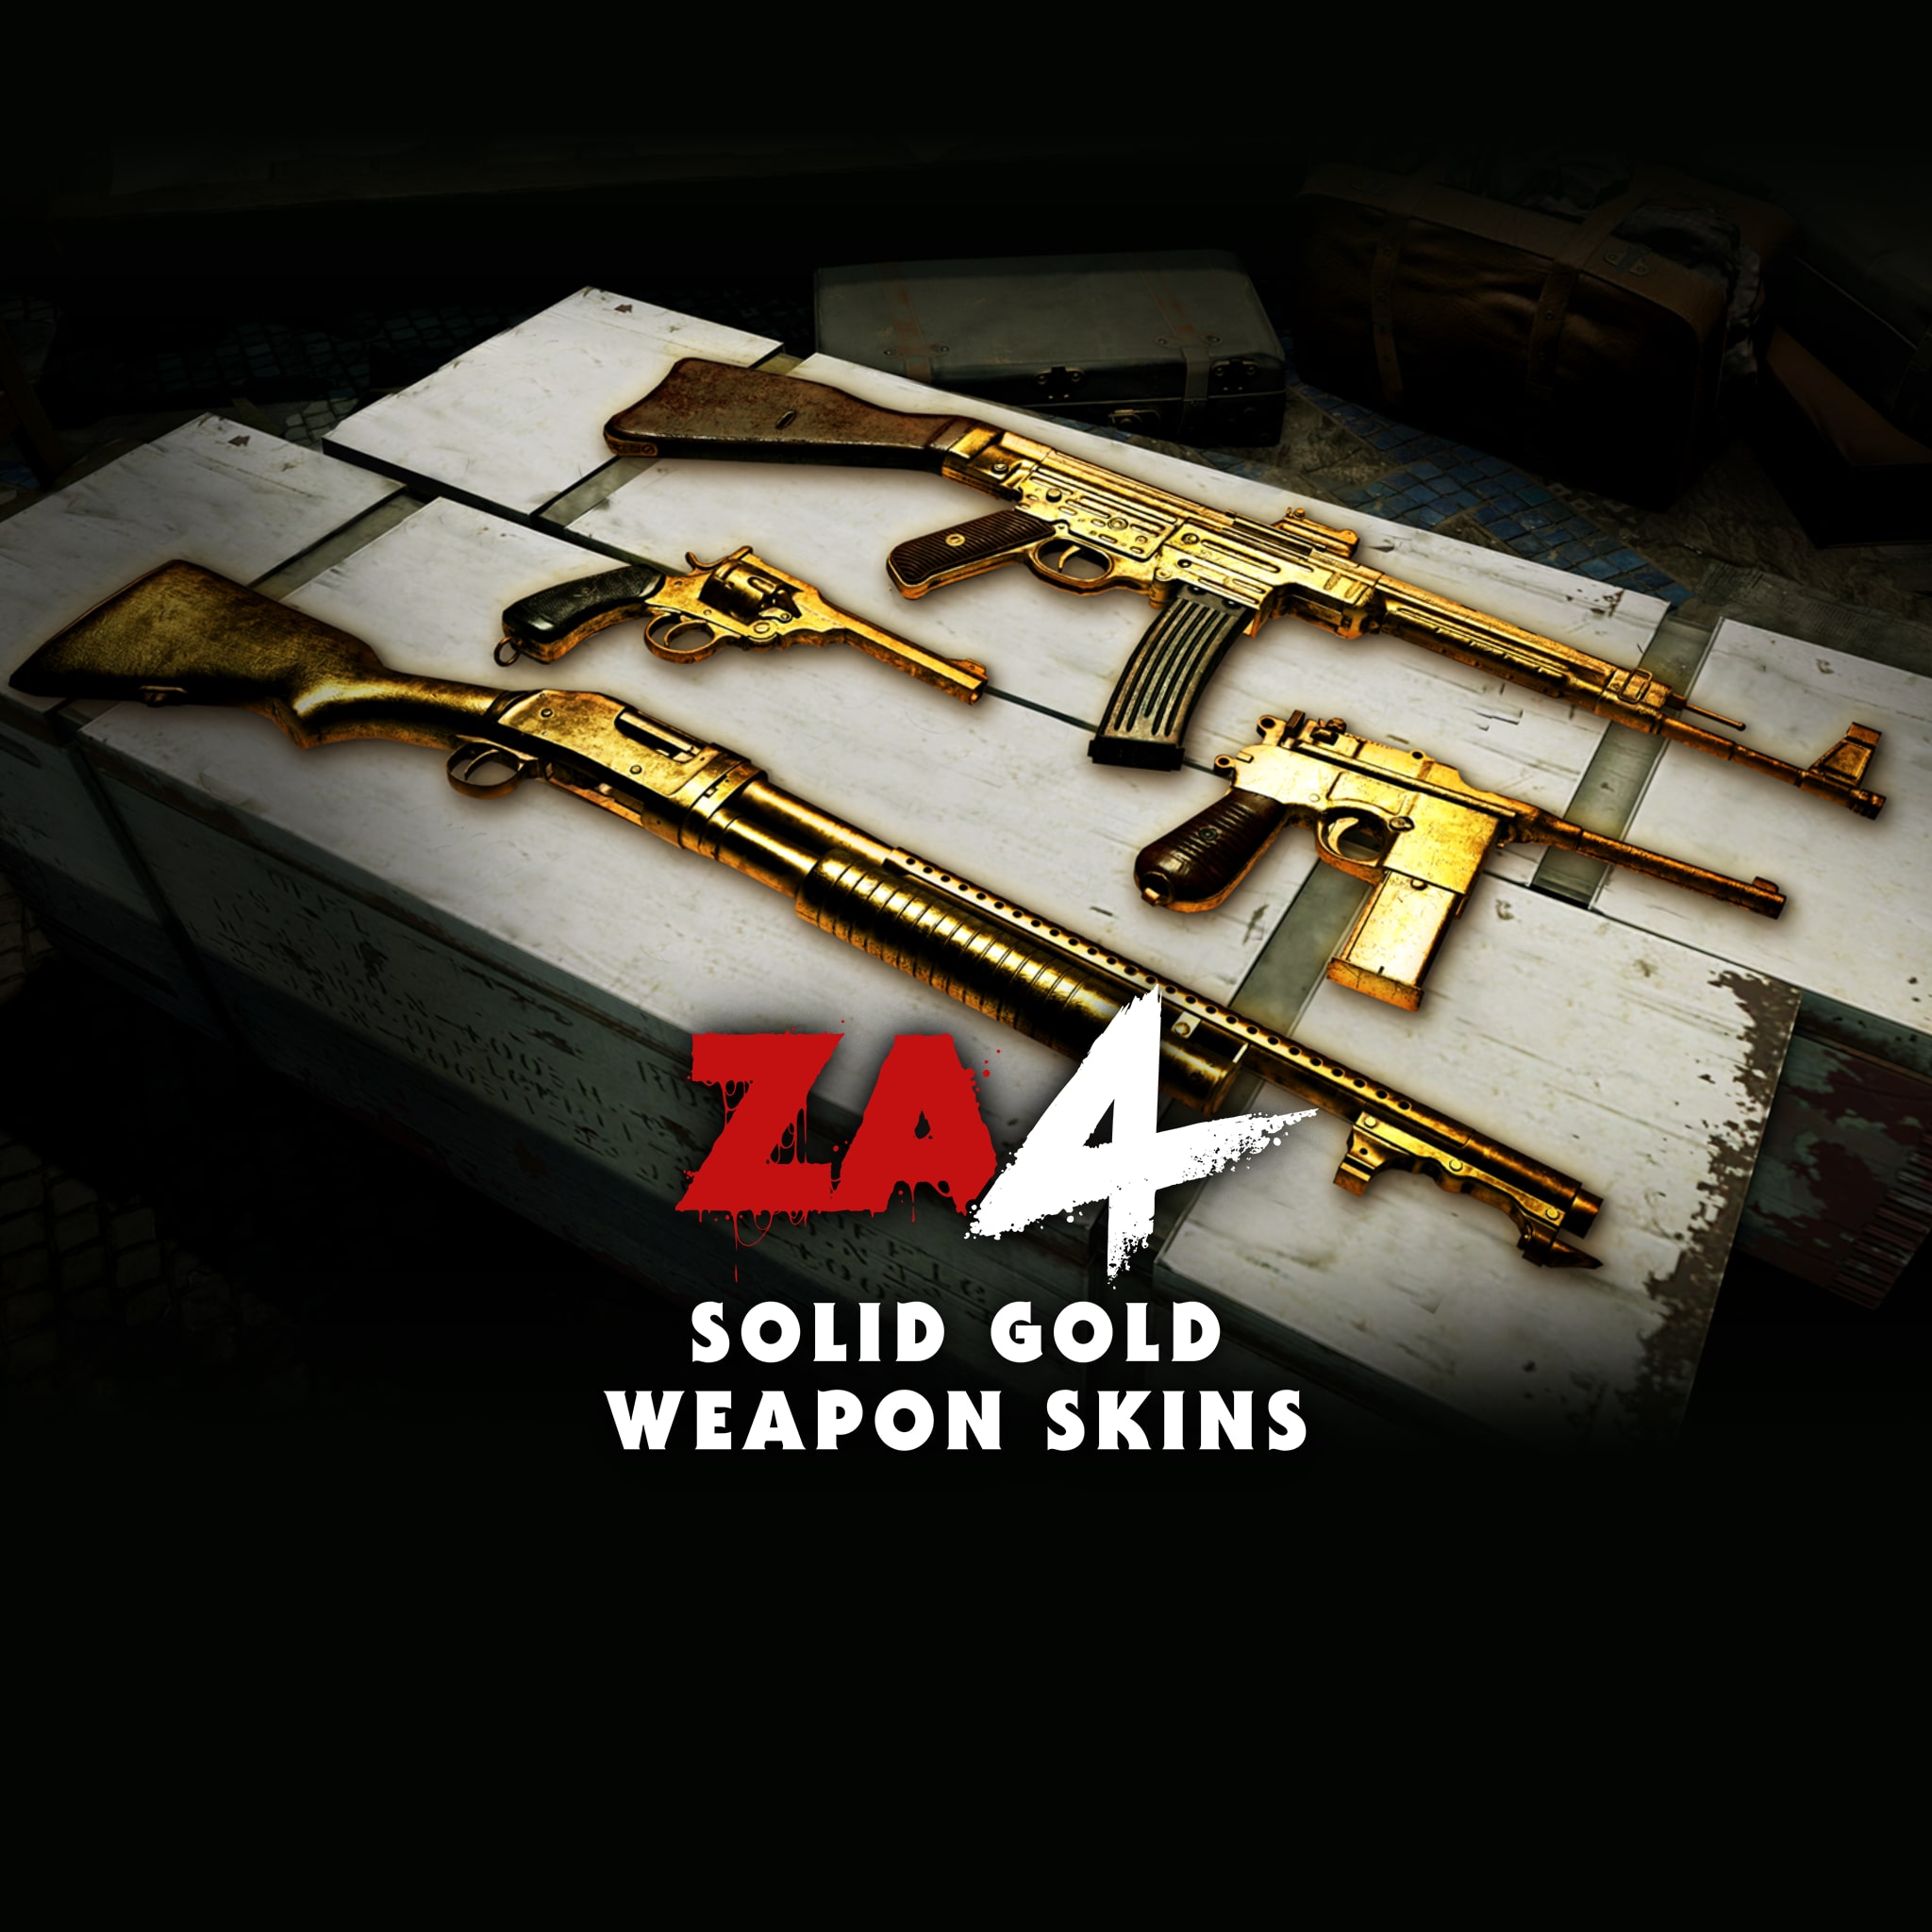 Zombie Army 4: Solid Gold Weapon Skins